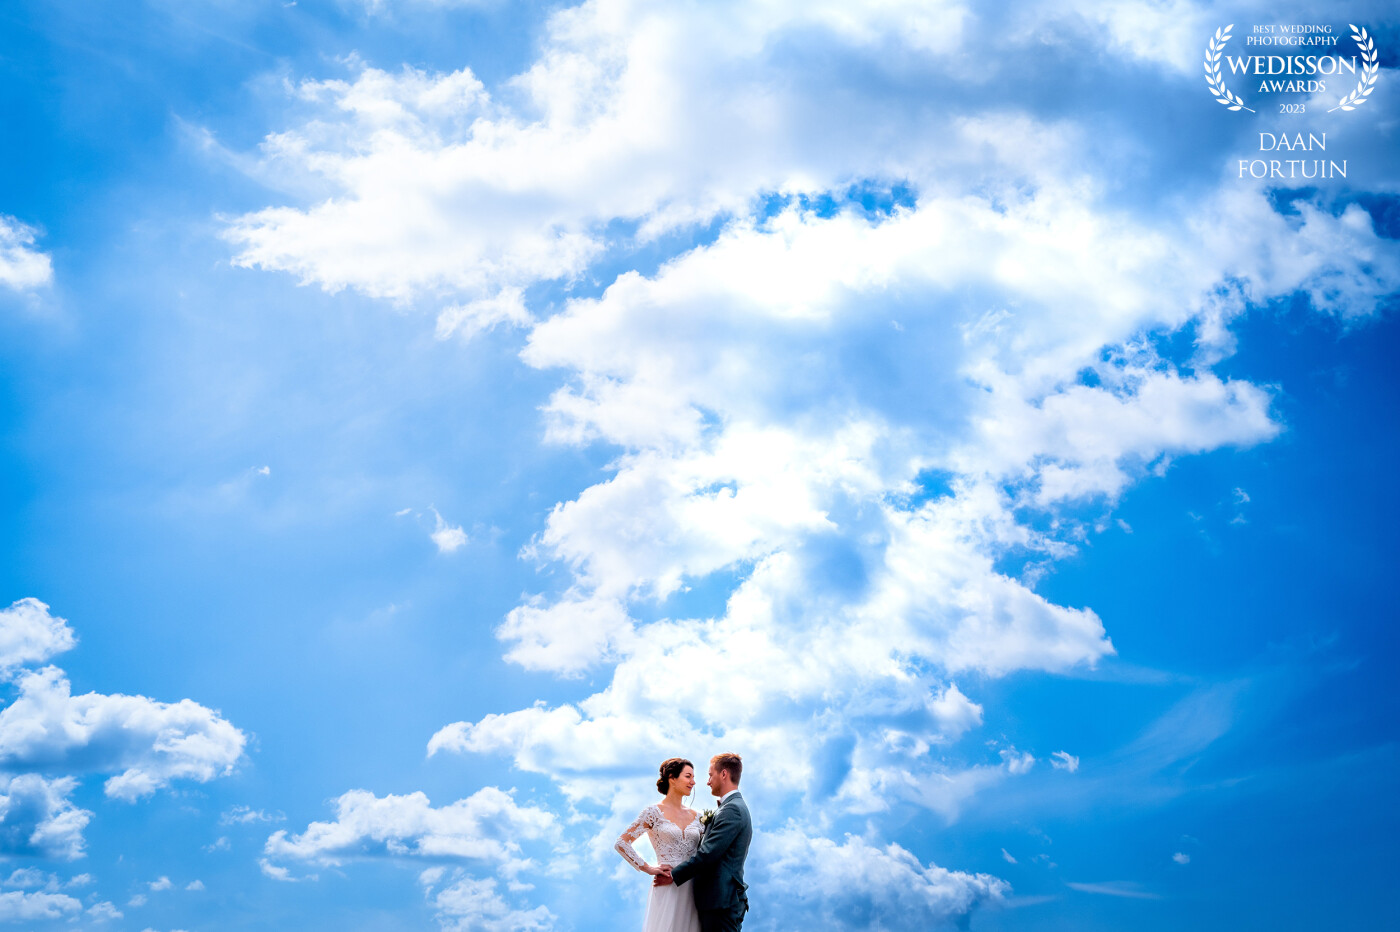 this photo was taken at Naturals a Dutch museum.. We where just taking a break in the fresh air .. when I saw these beautiful clouds so I took advantage of it and put the bridal couple on a table to remove background noise.. this was the result ;)